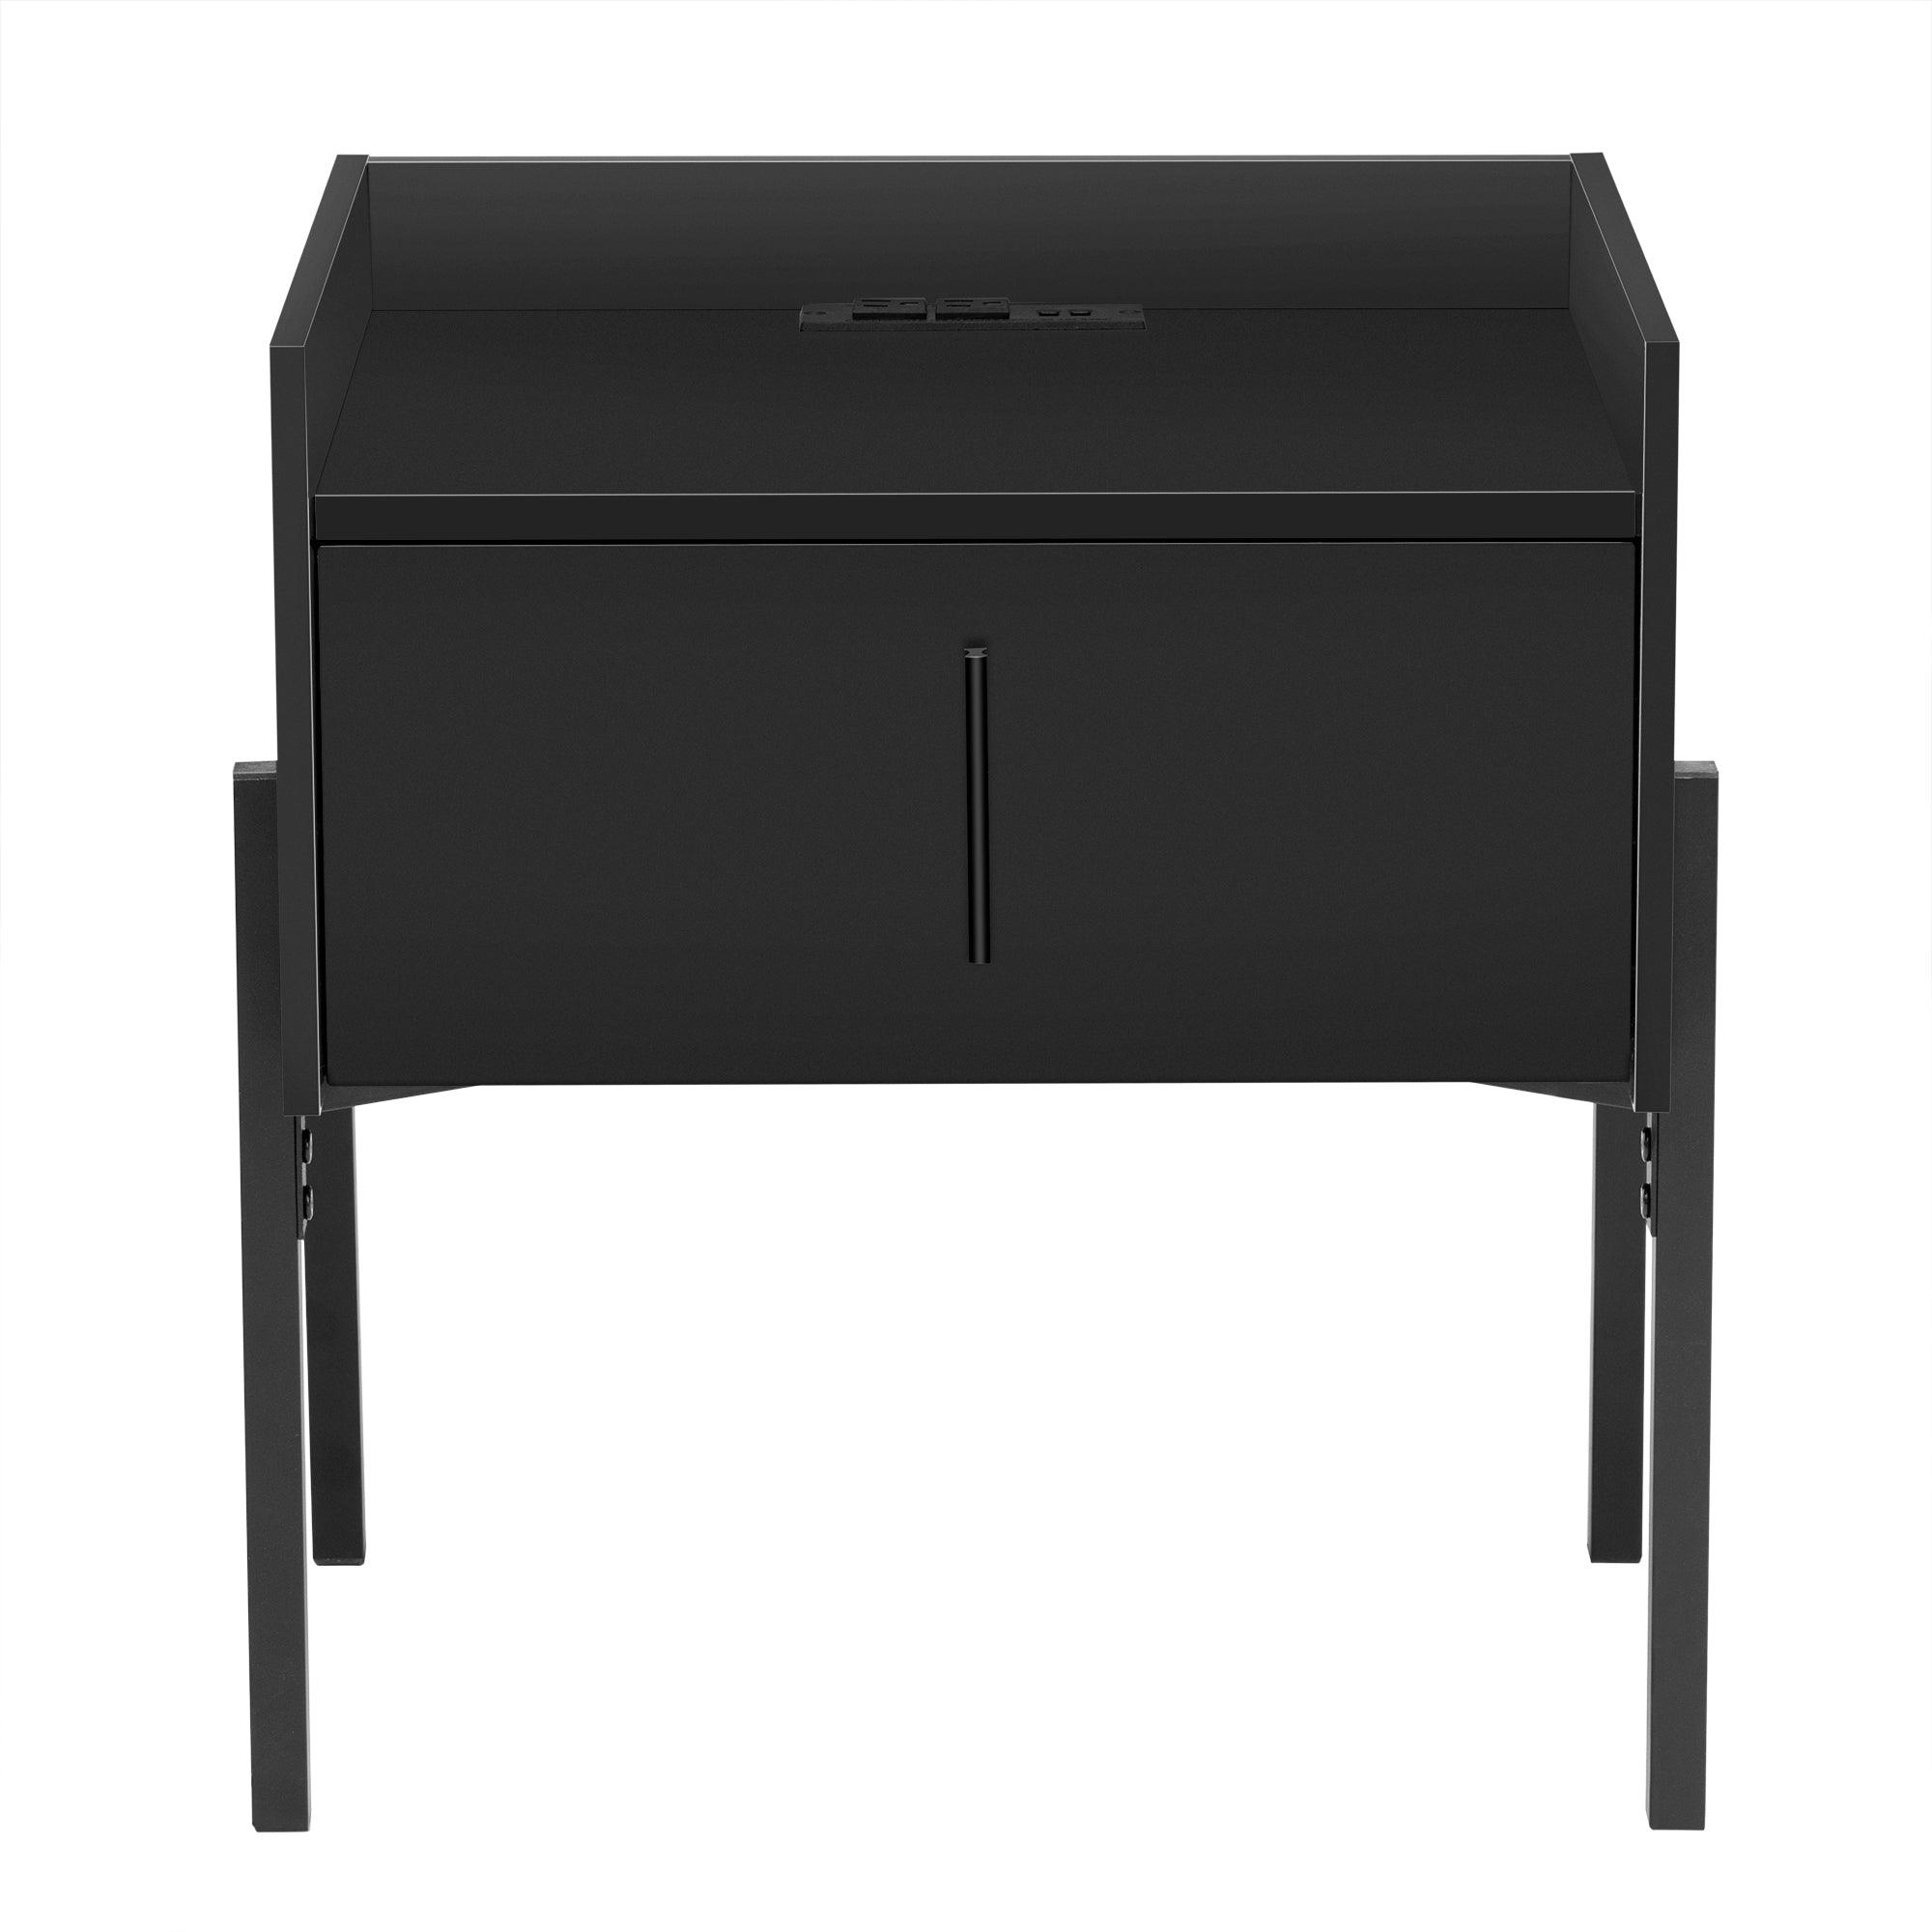 Shop Nightstand with Drawer ,Storage Bedside Table with USB Charging Ports- Black Mademoiselle Home Decor